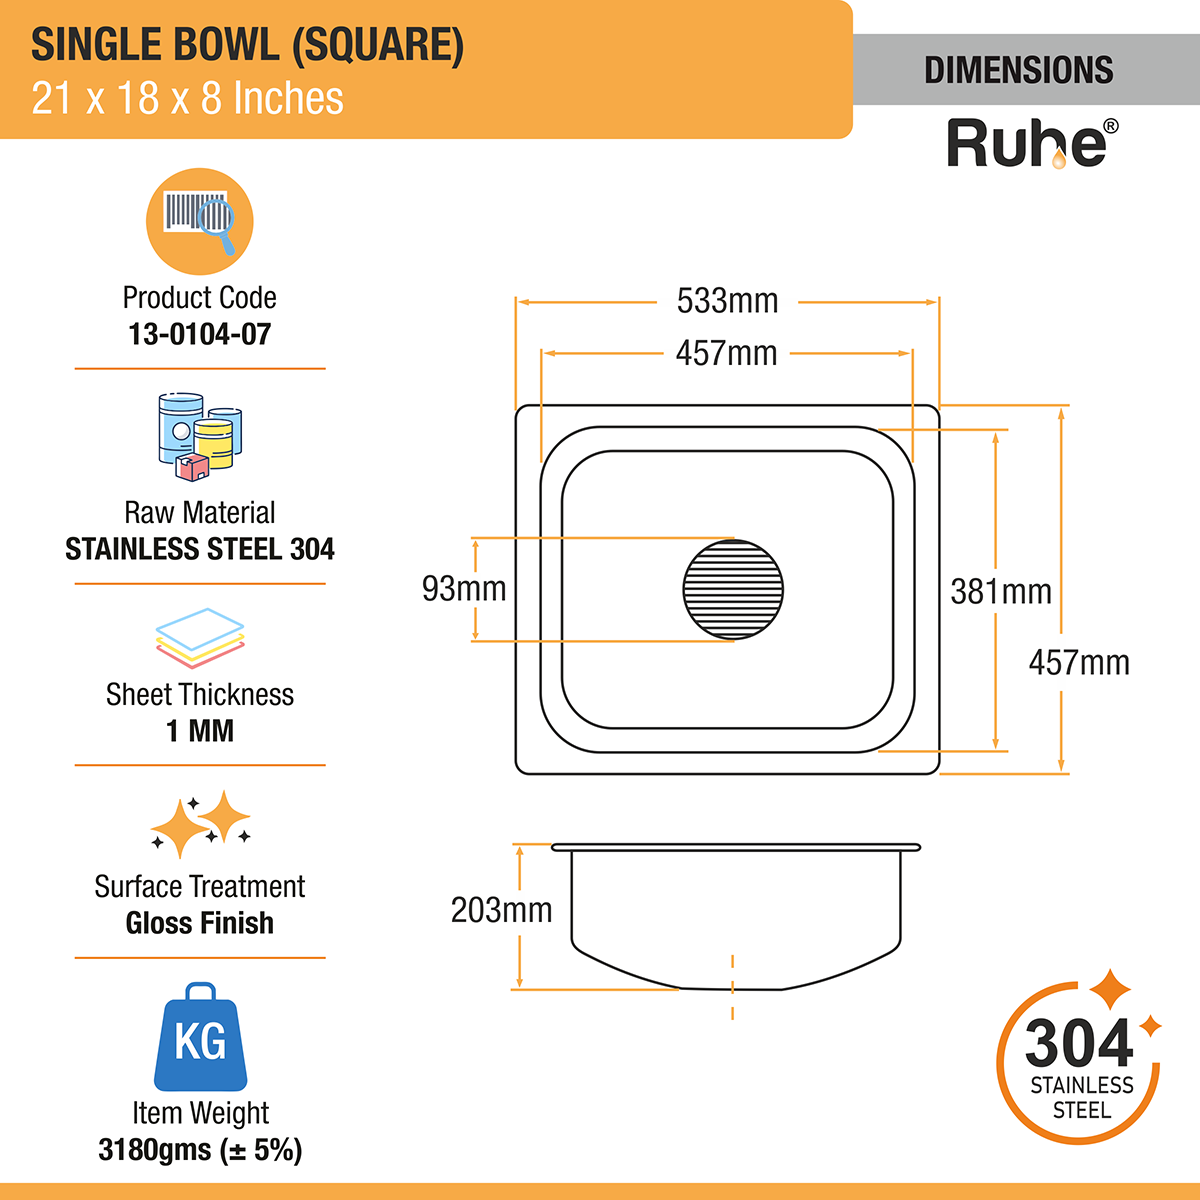 Square Single Bowl (21 x 18 x 8 inches) 304-Grade Kitchen Sink dimensions and sizes